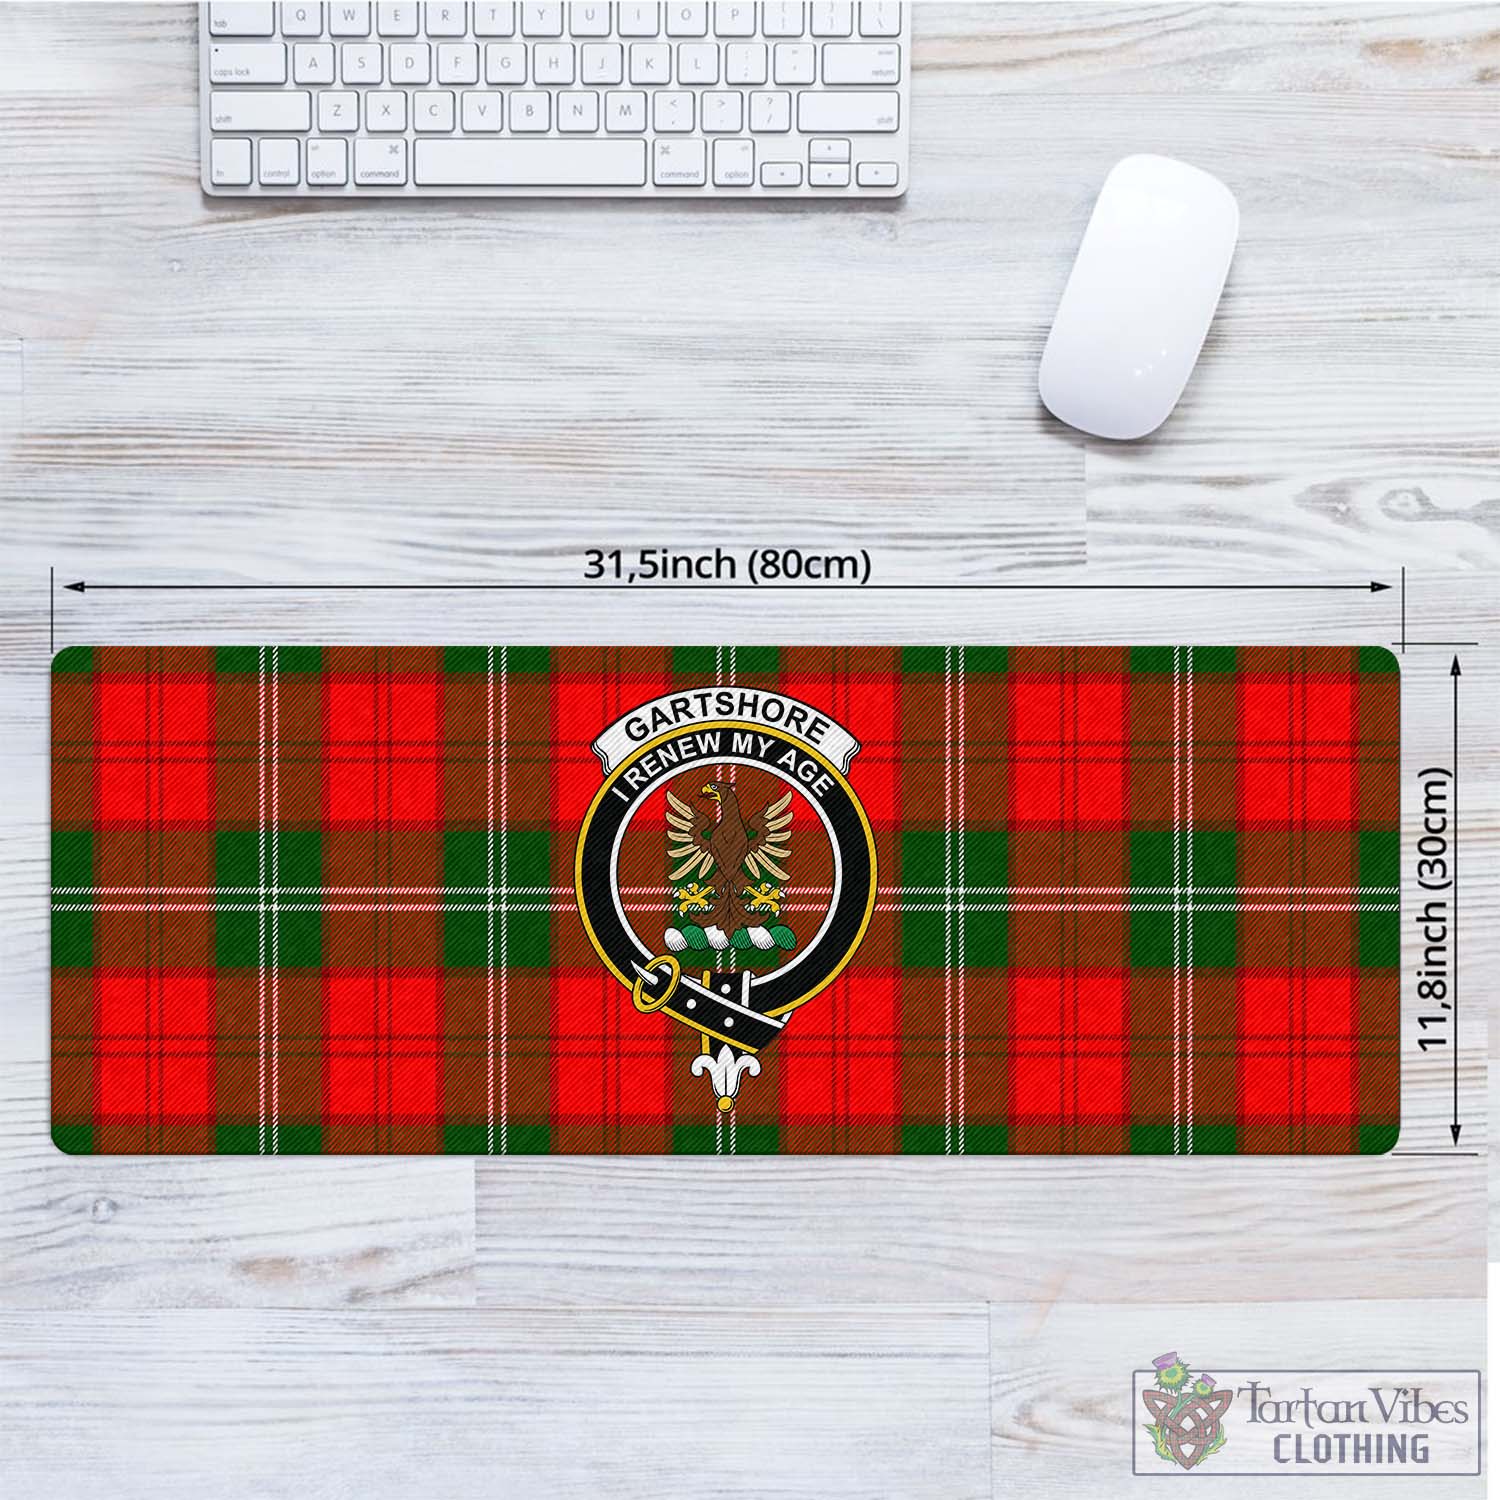 Tartan Vibes Clothing Gartshore Tartan Mouse Pad with Family Crest